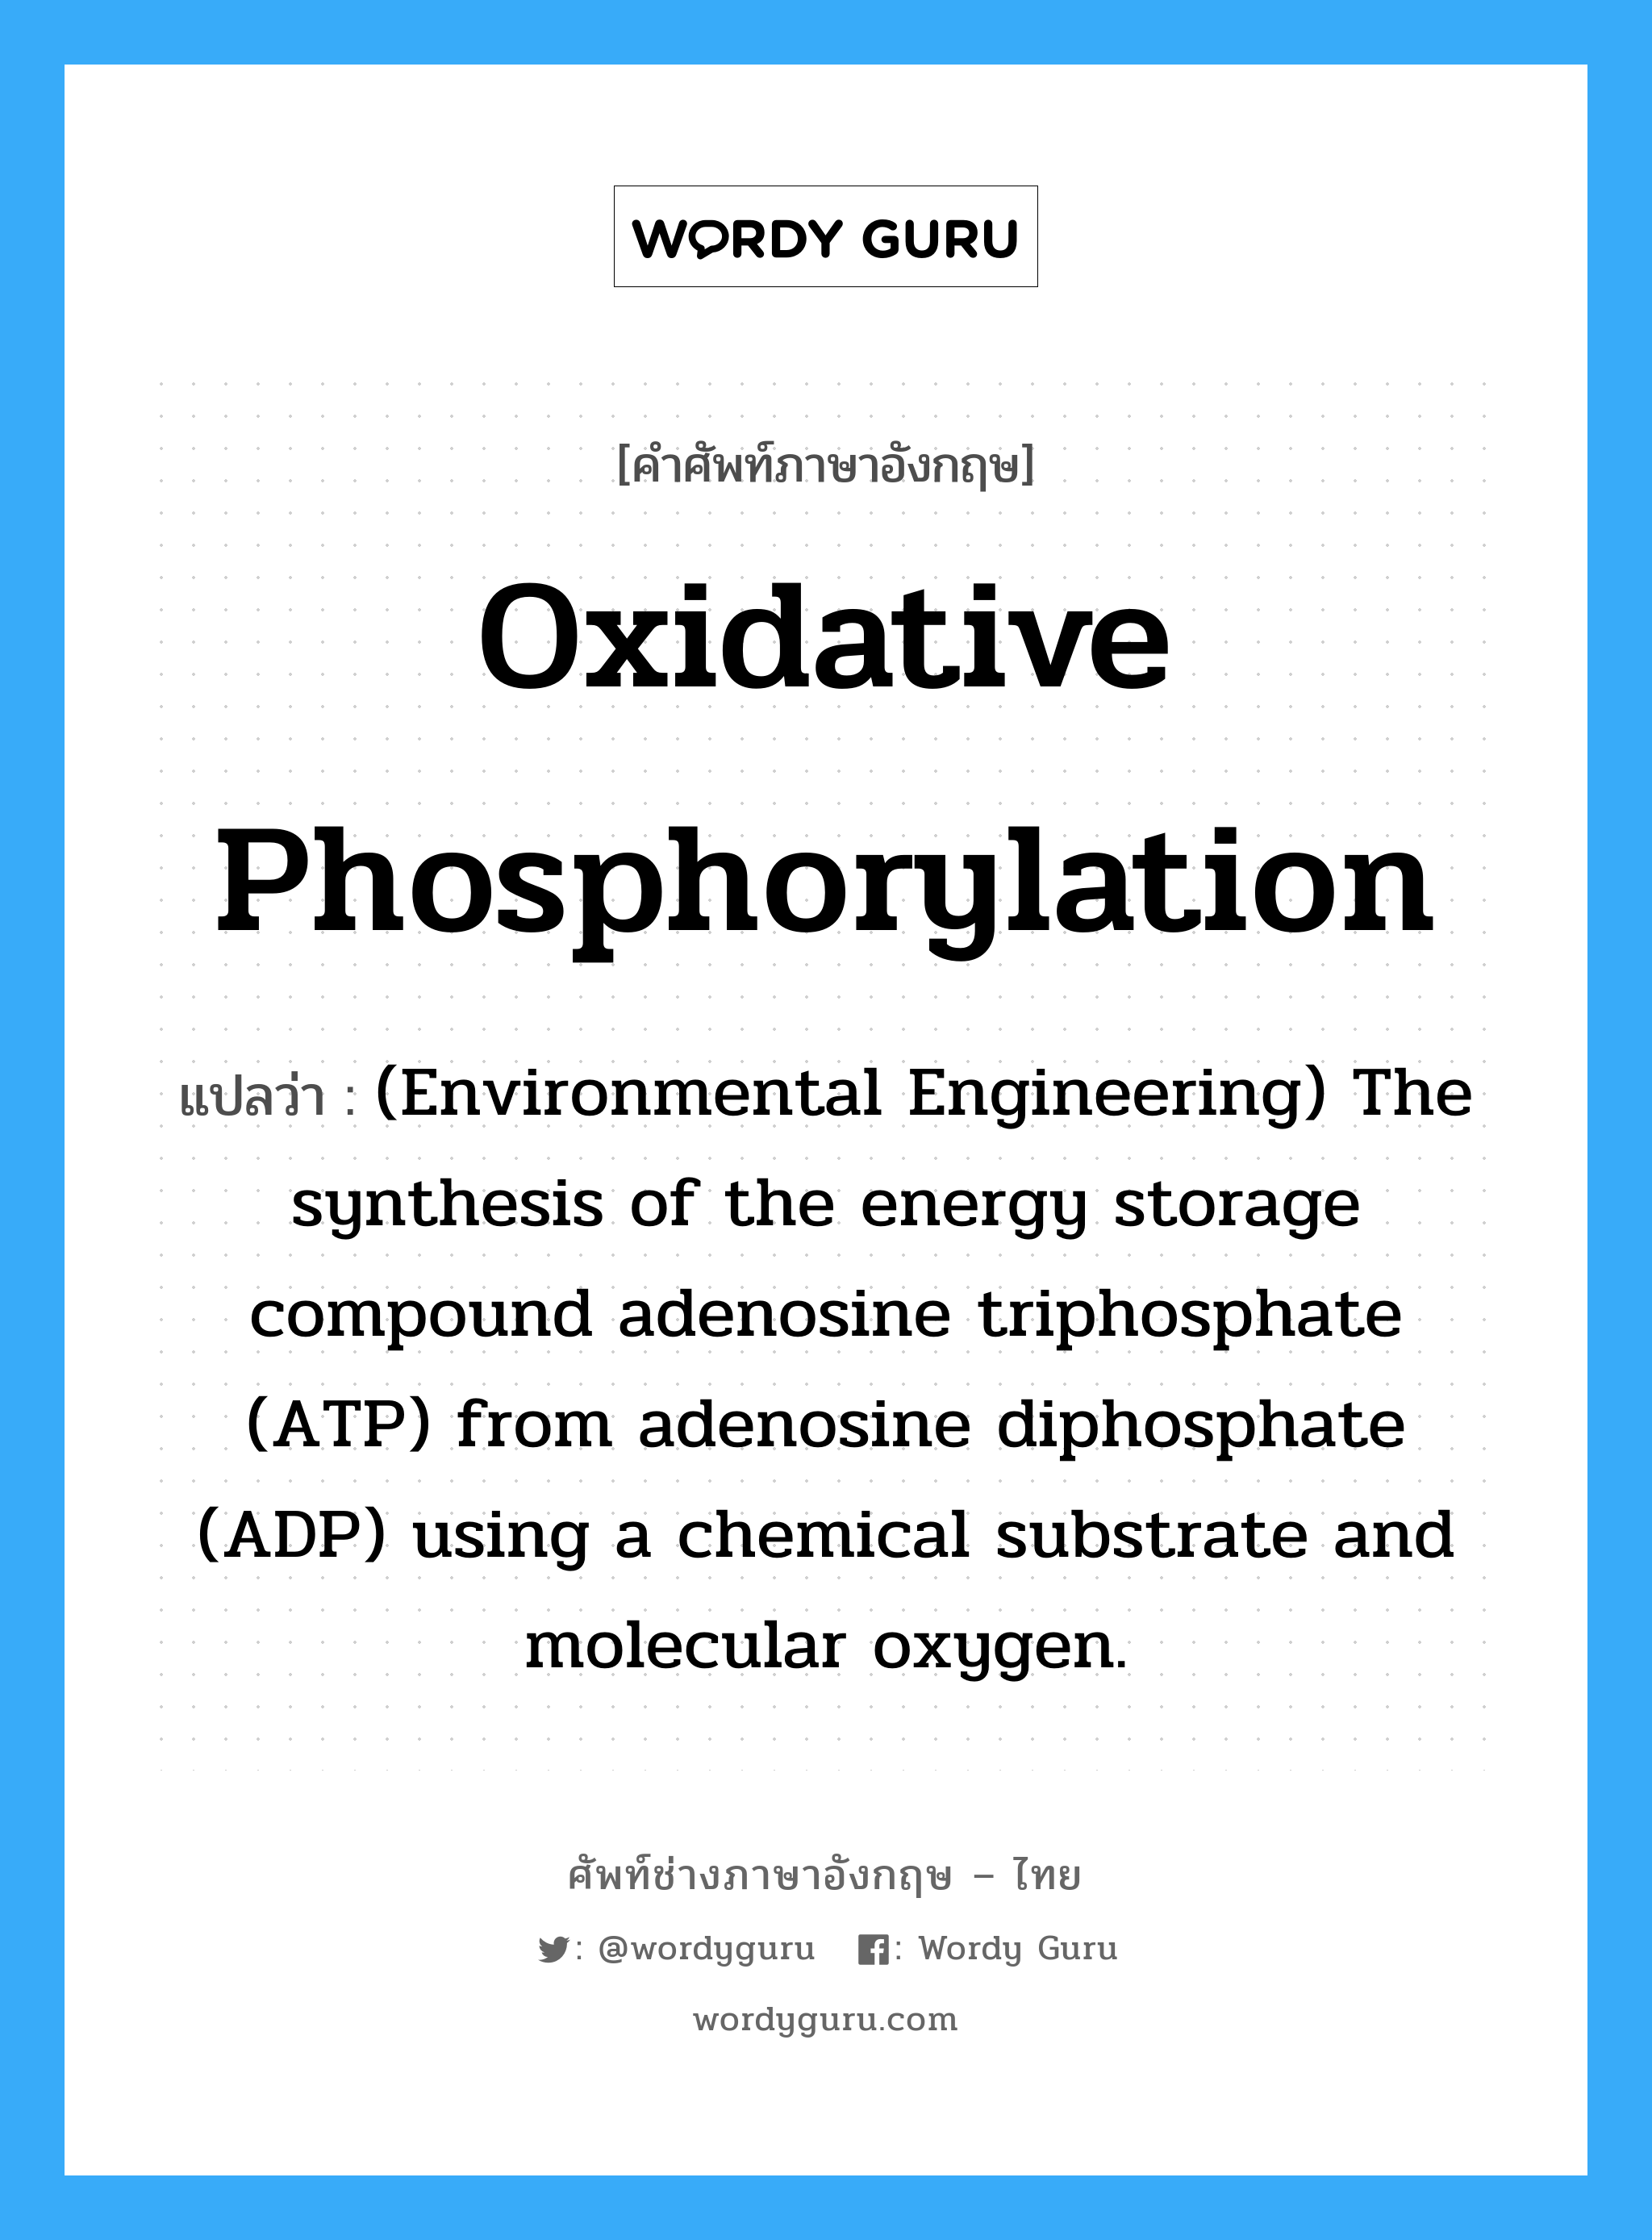 Oxidative phosphorylation แปลว่า?, คำศัพท์ช่างภาษาอังกฤษ - ไทย Oxidative phosphorylation คำศัพท์ภาษาอังกฤษ Oxidative phosphorylation แปลว่า (Environmental Engineering) The synthesis of the energy storage compound adenosine triphosphate (ATP) from adenosine diphosphate (ADP) using a chemical substrate and molecular oxygen.